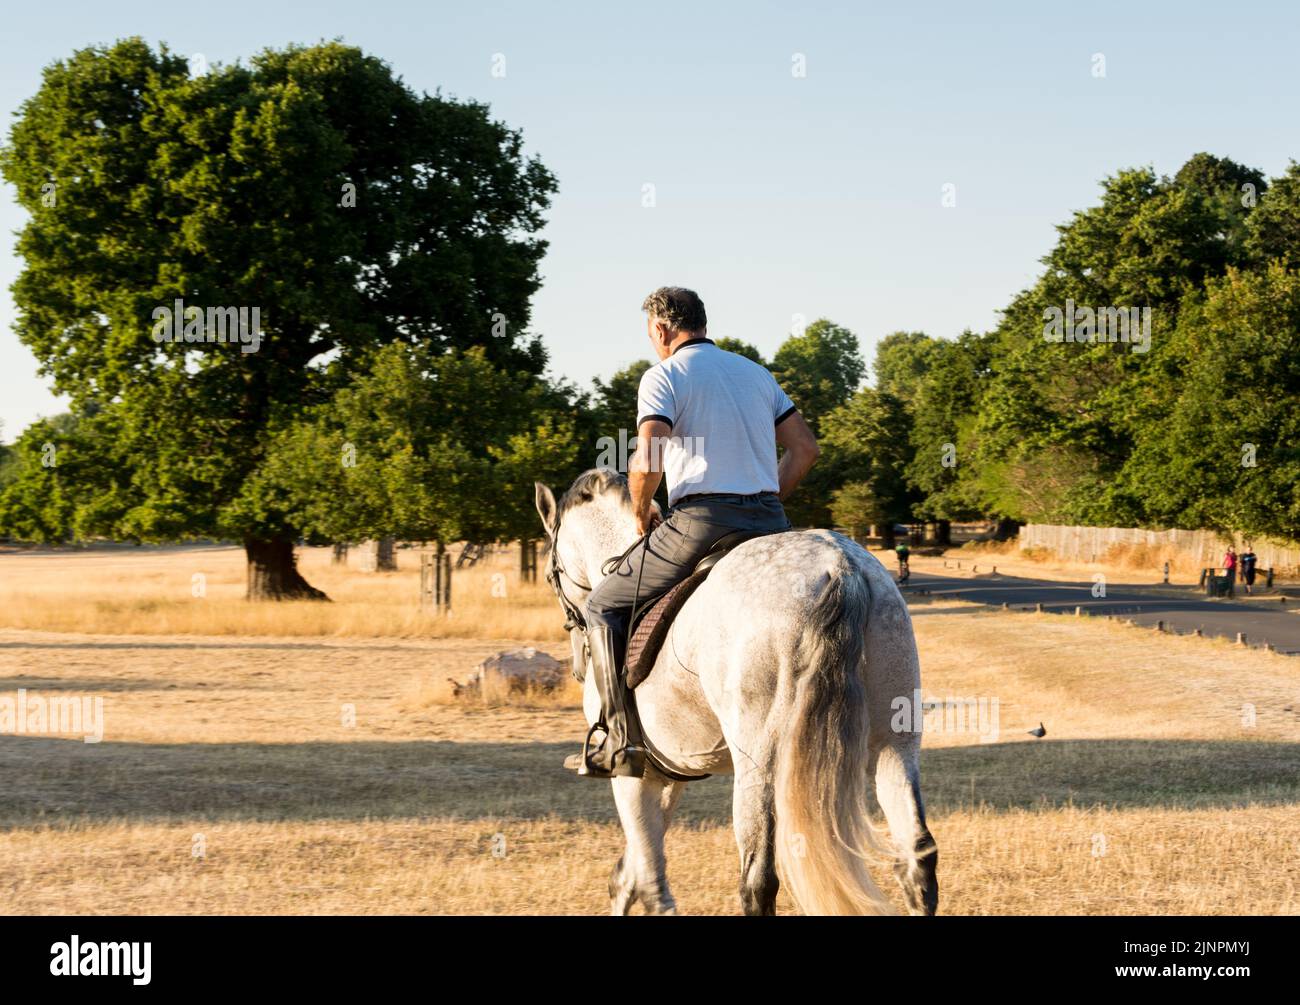 A man riding a large grey horse in a drought stricken Richmond Park, London, London, SW15, England, UK Stock Photo